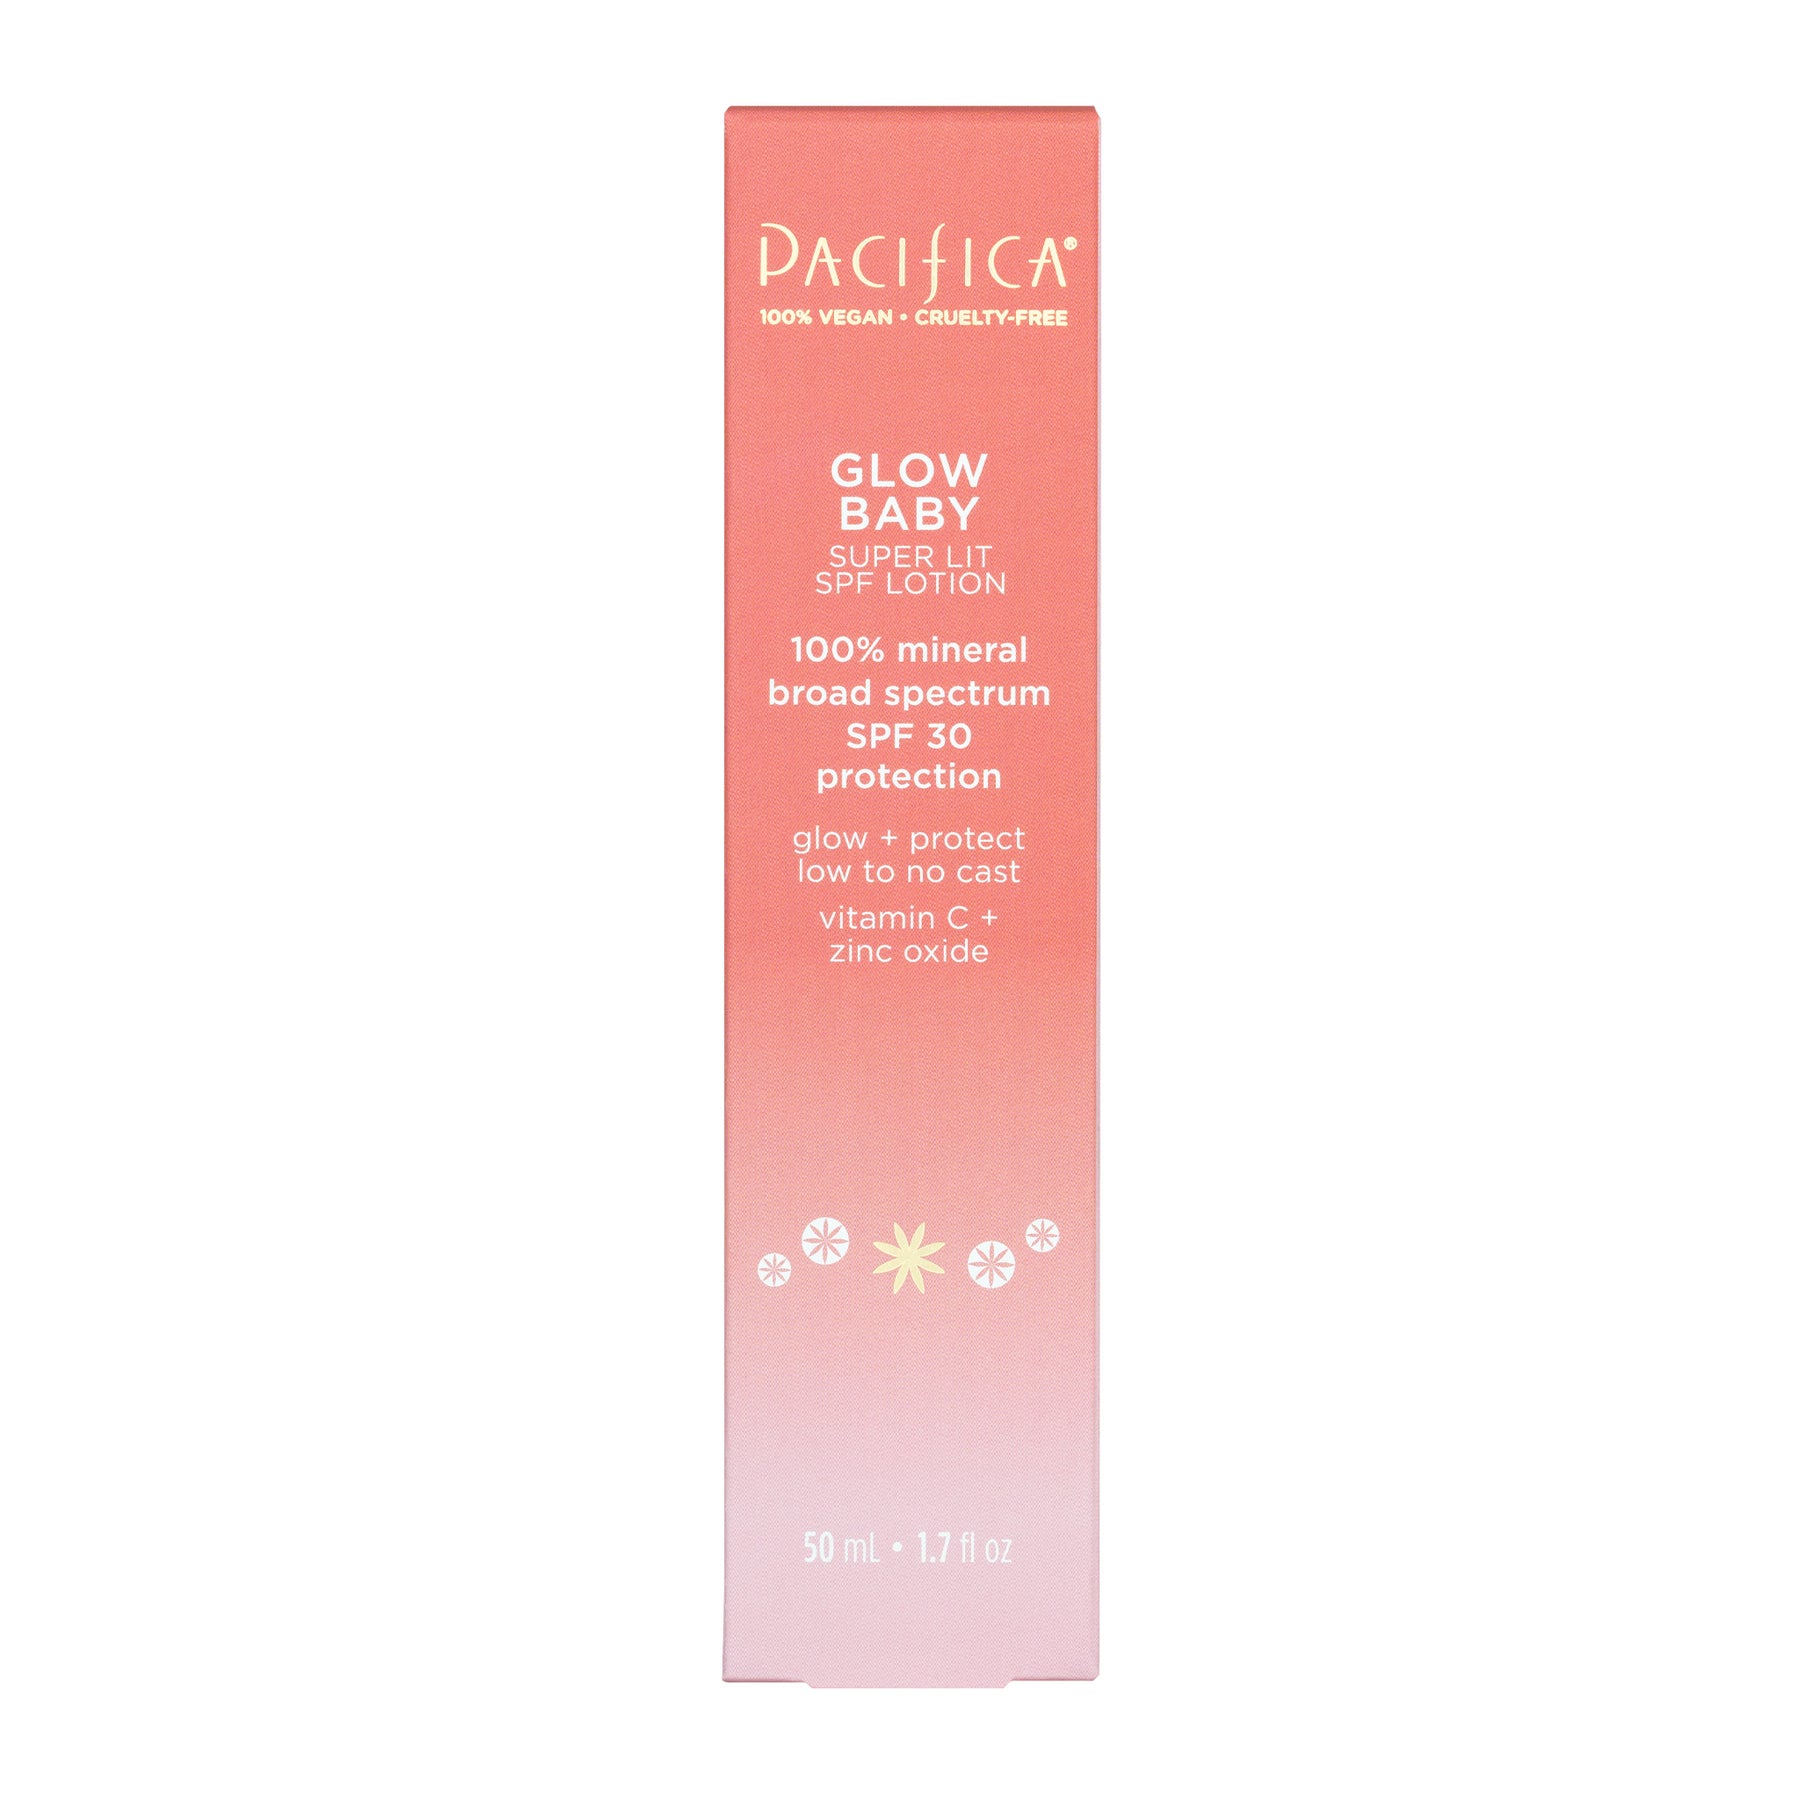 Glow Baby Super Lit SPF Lotion - Skin Care - Pacifica Beauty